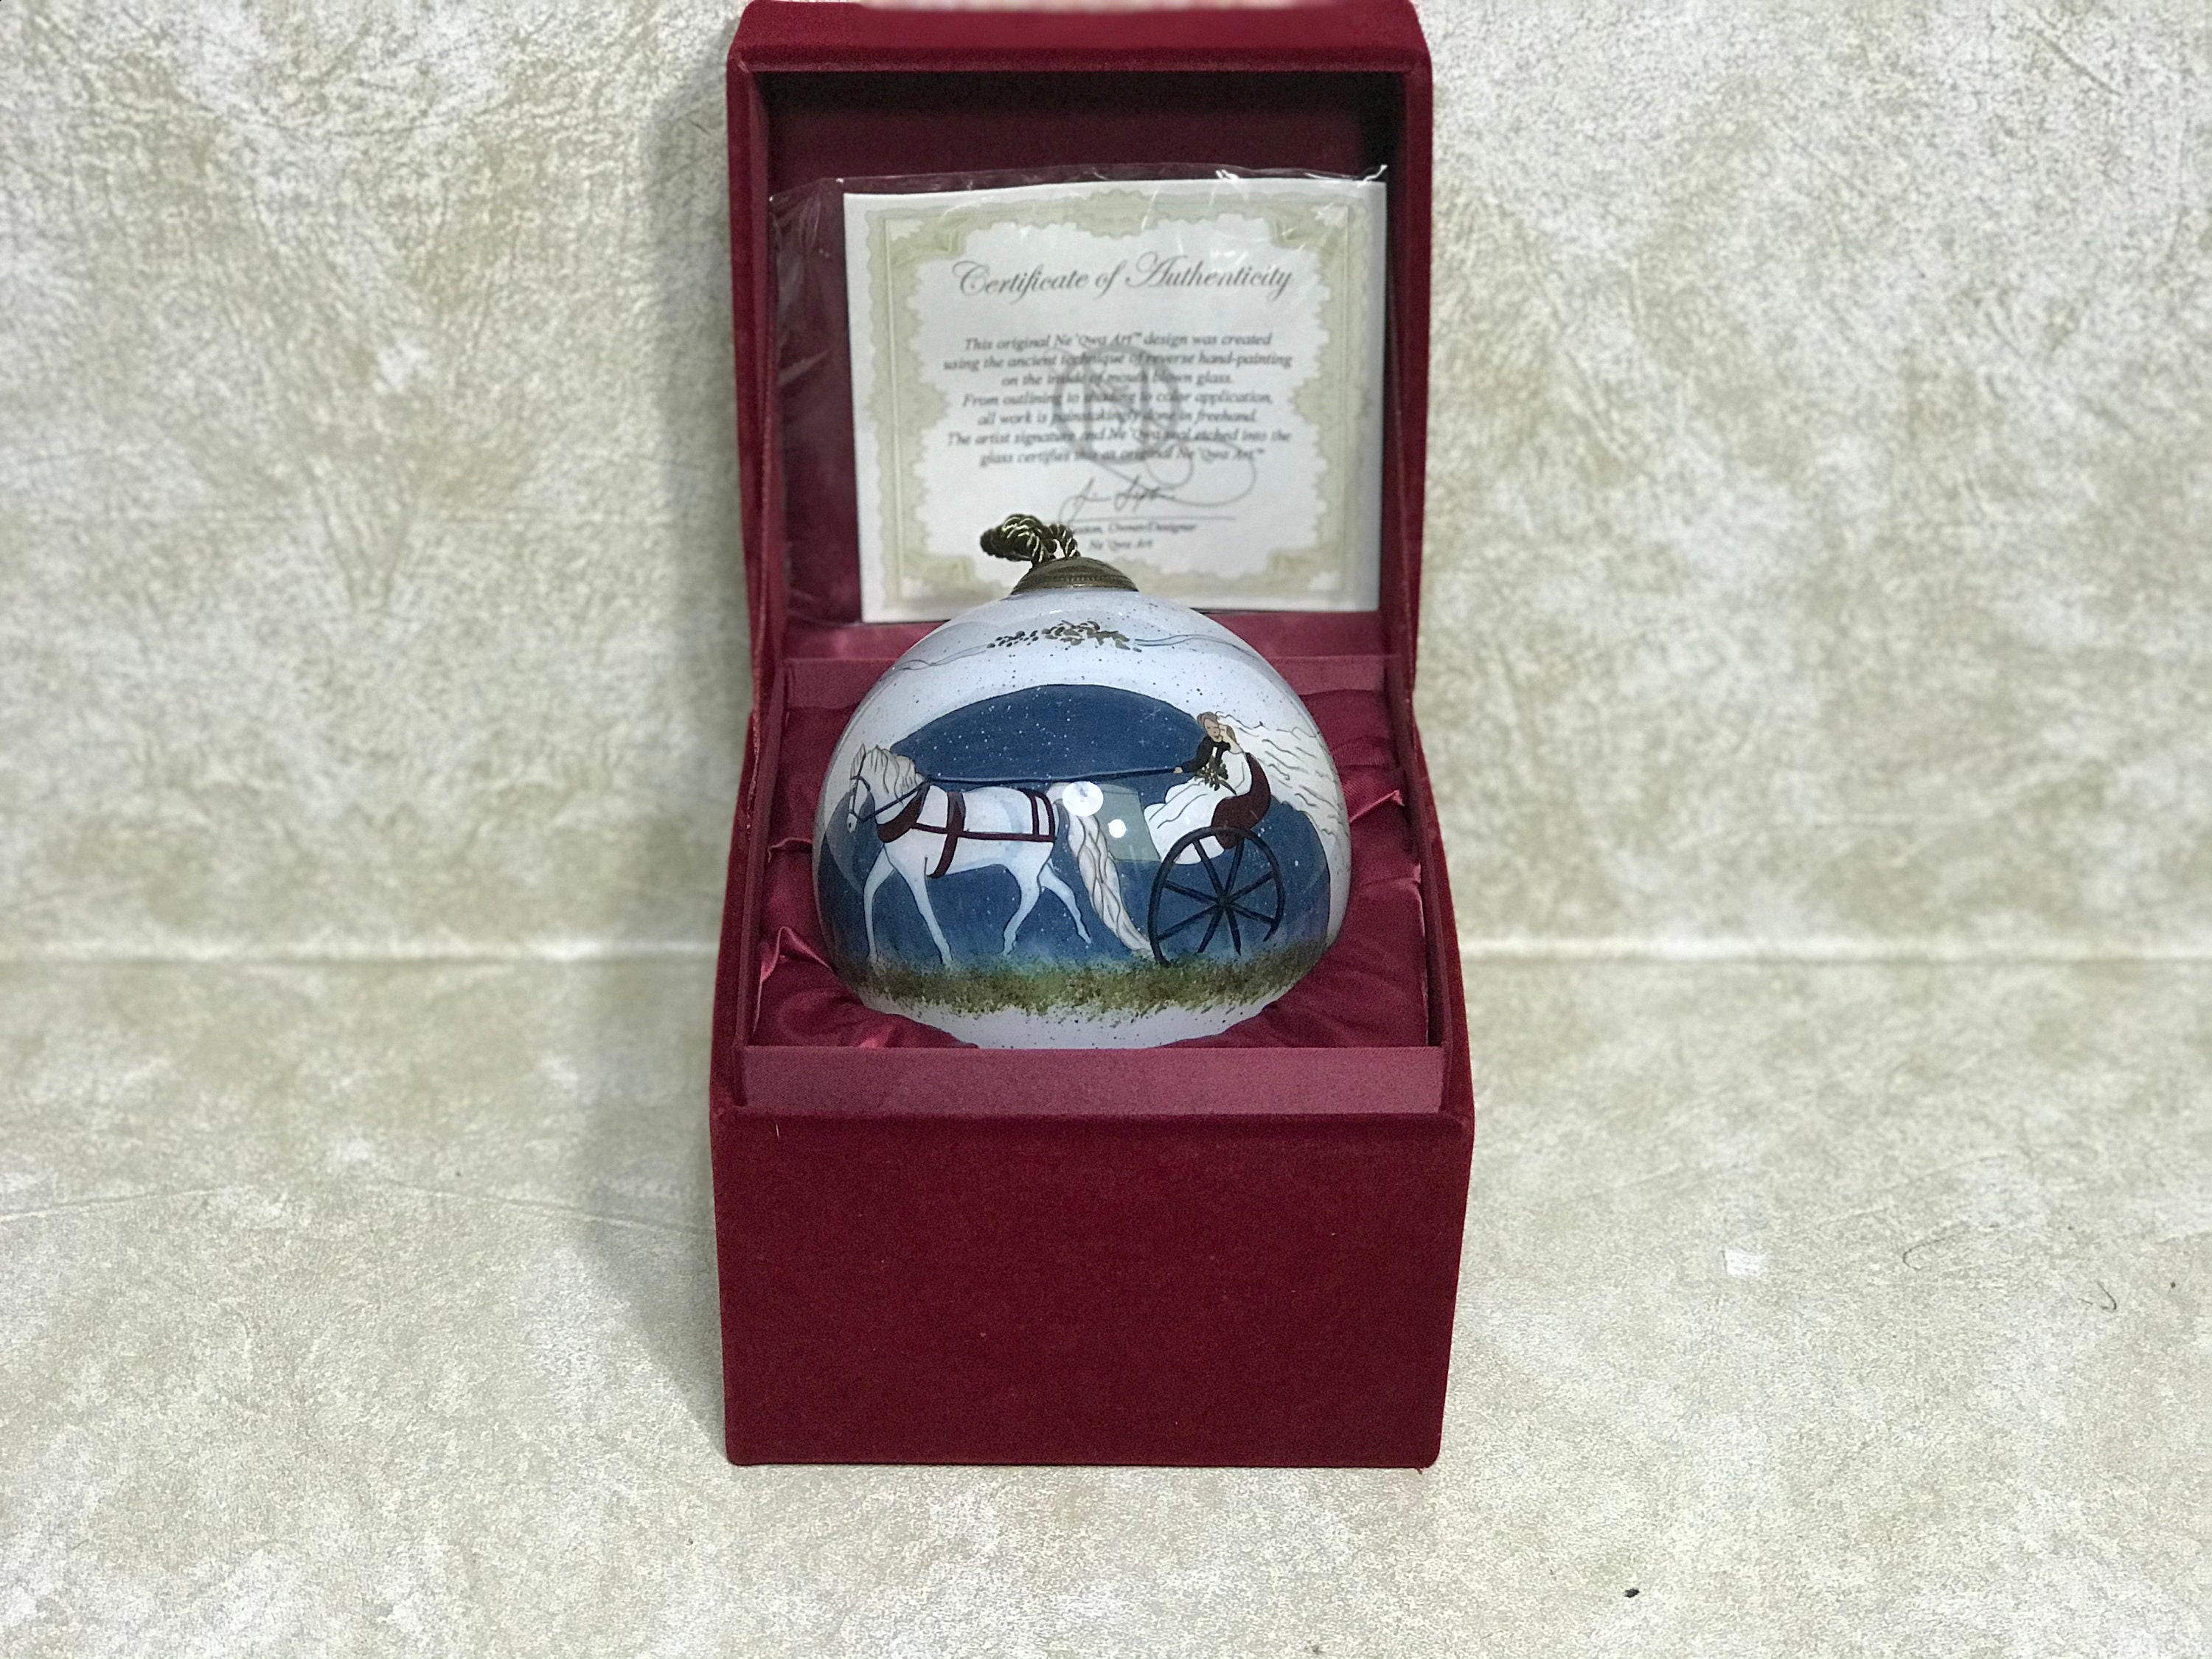 Ne Qwa Ornament for sale | Only 3 left at -75%